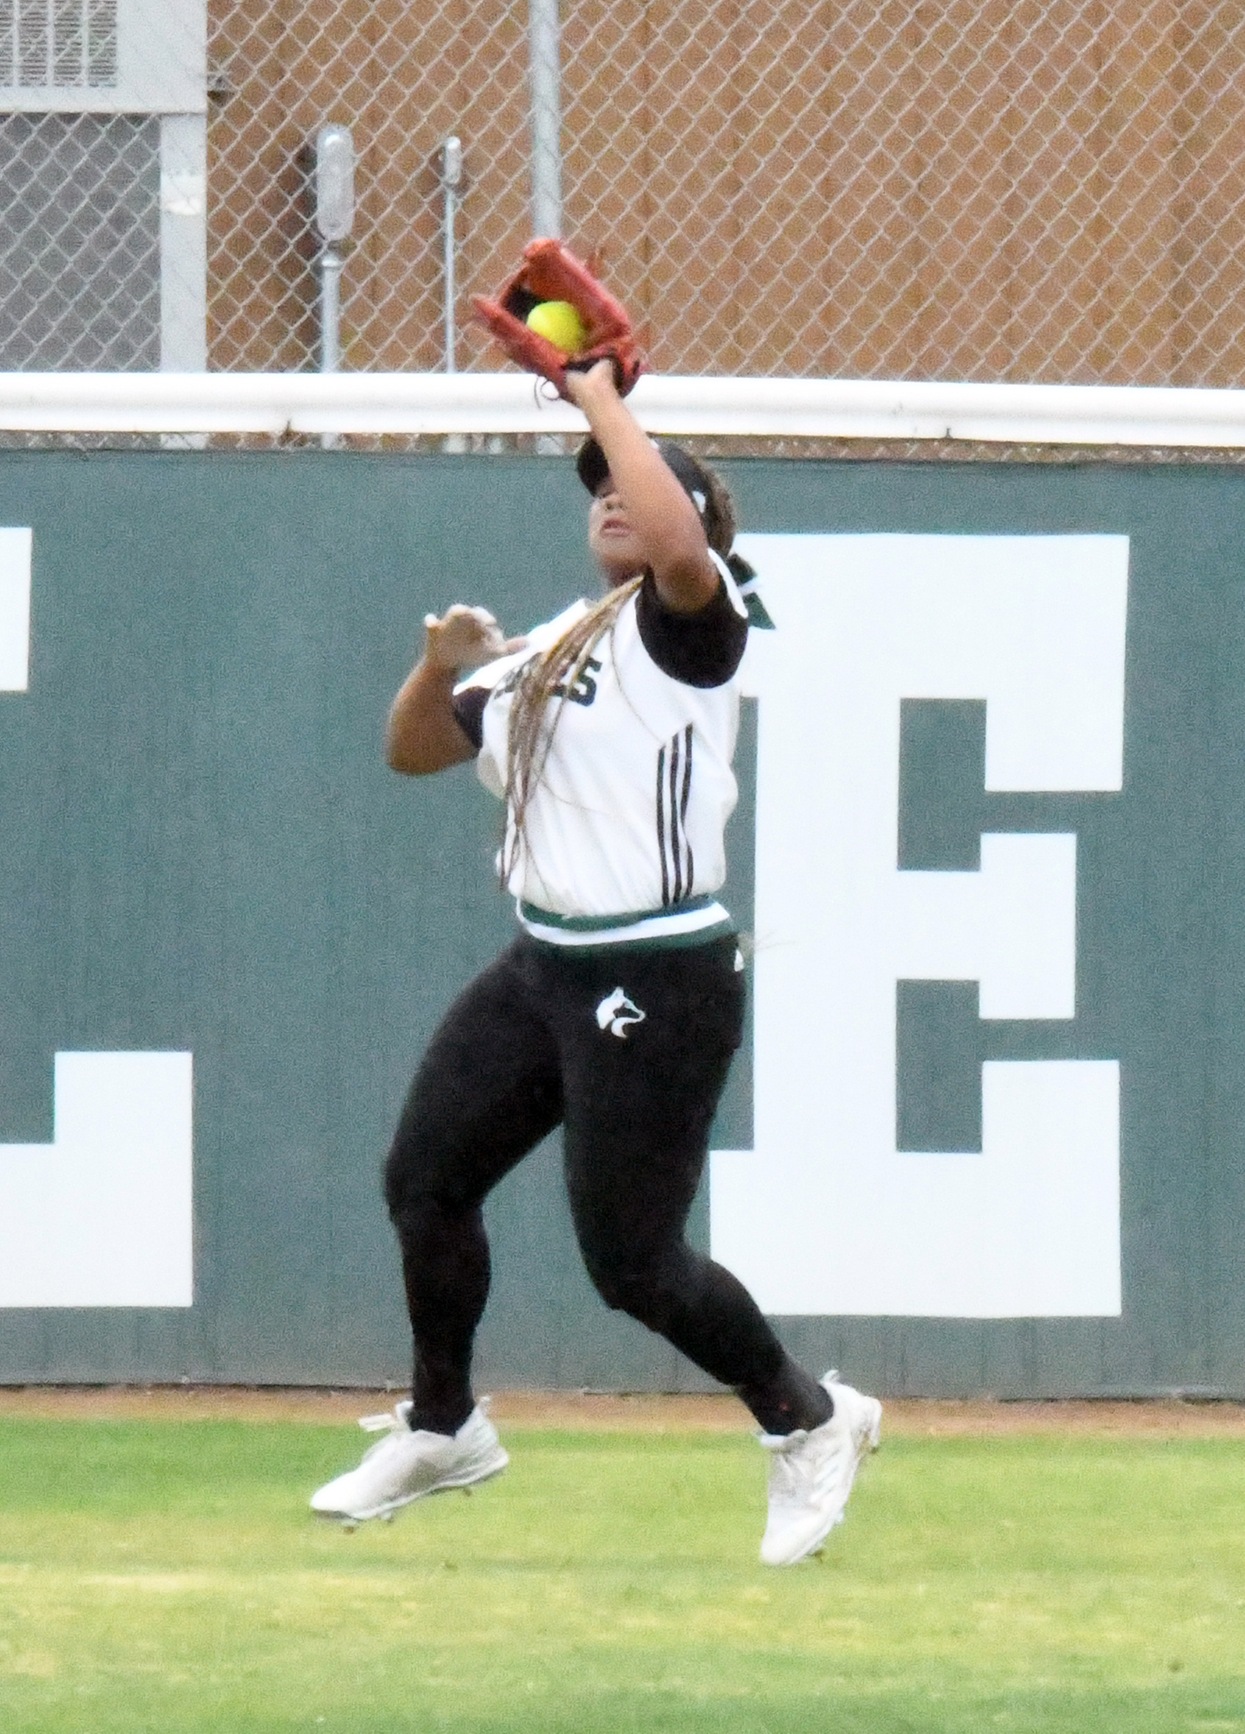 Center fielder Monèt Manning was 3-for-3 today in a 6-3 upset win over powerhouse Santa Ana College. The Huskies scored 3 runs in the bottom of the 6th. Manning doubled and singled twice. (photo by DeeDee Jackson)